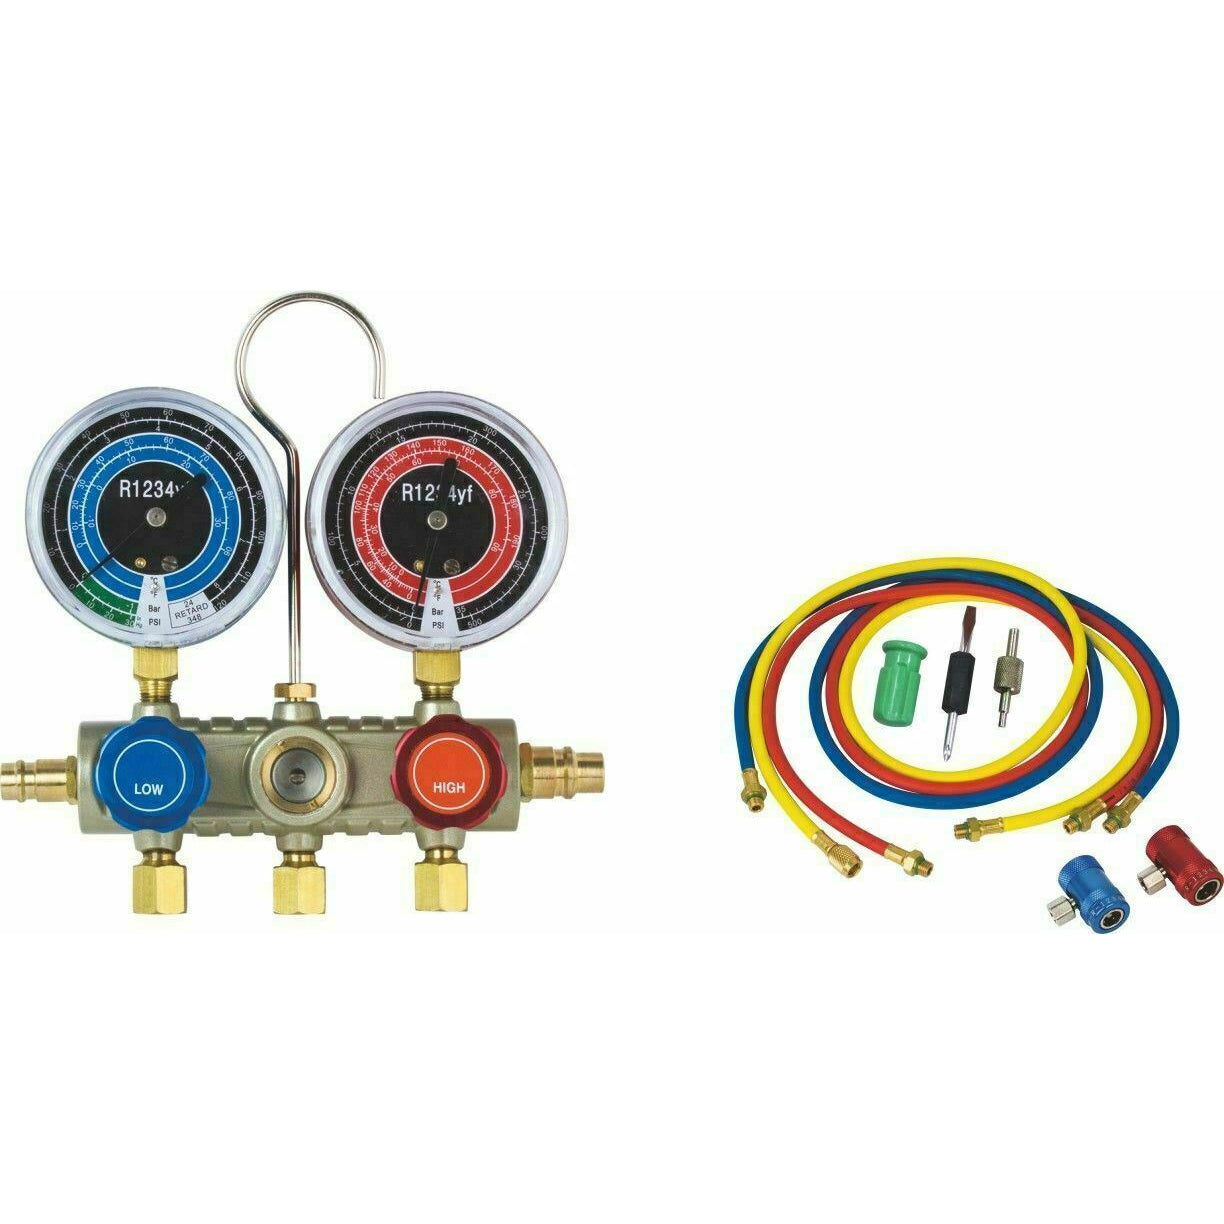 REFRIG MANIFOLD KIT for 1234yf—with 3-Piece M12 Hose Set & Couplers